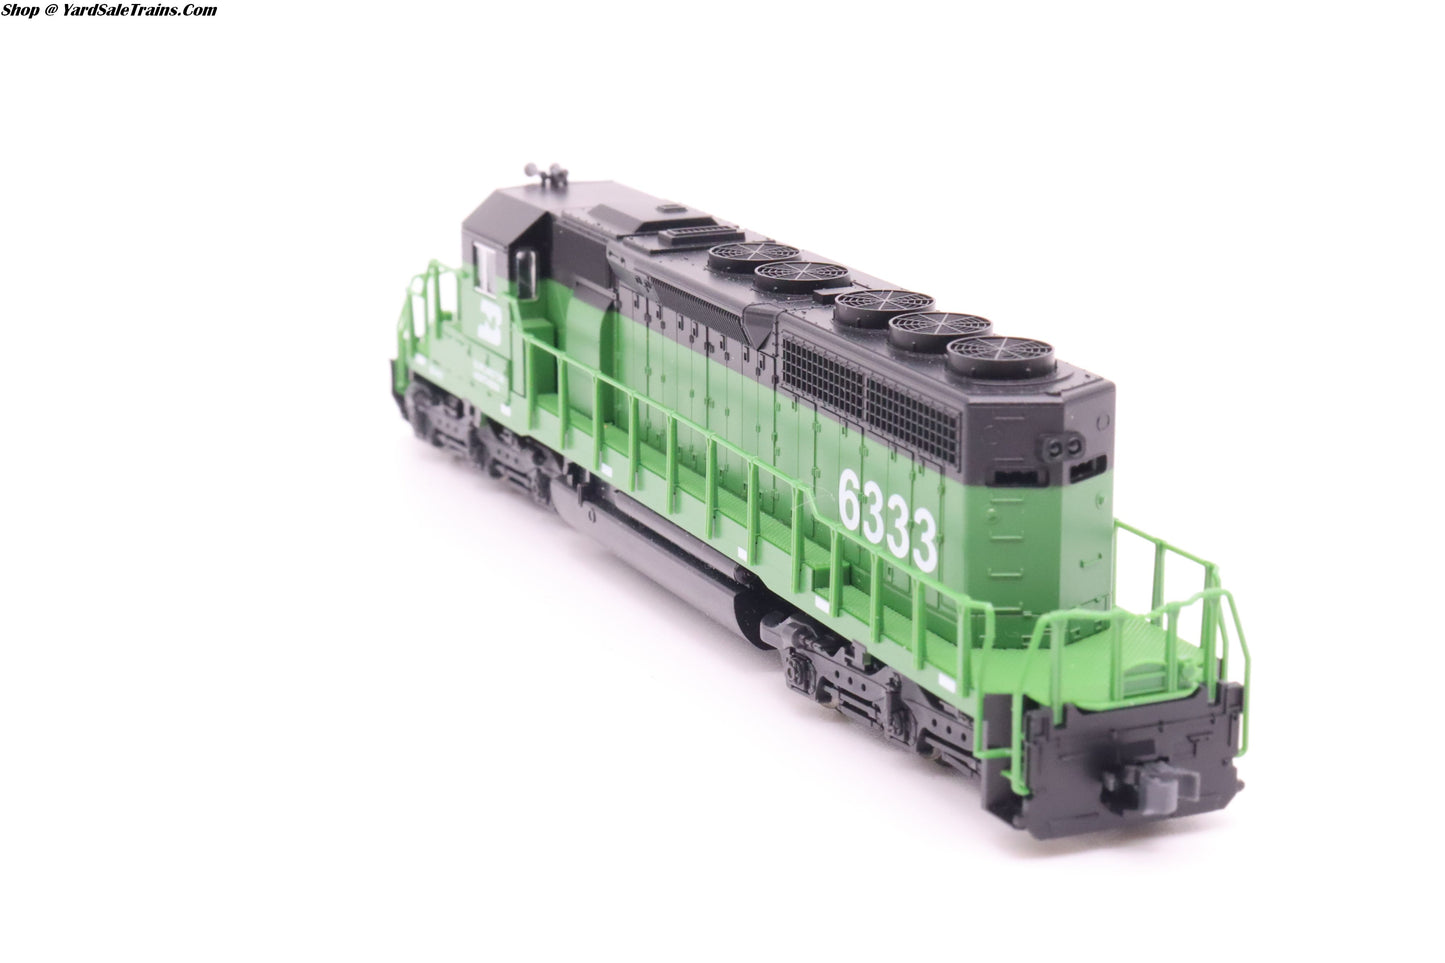 KAT-176-4801 - SD40-2 Early Burlington Northern - BN #6333 - Preowned